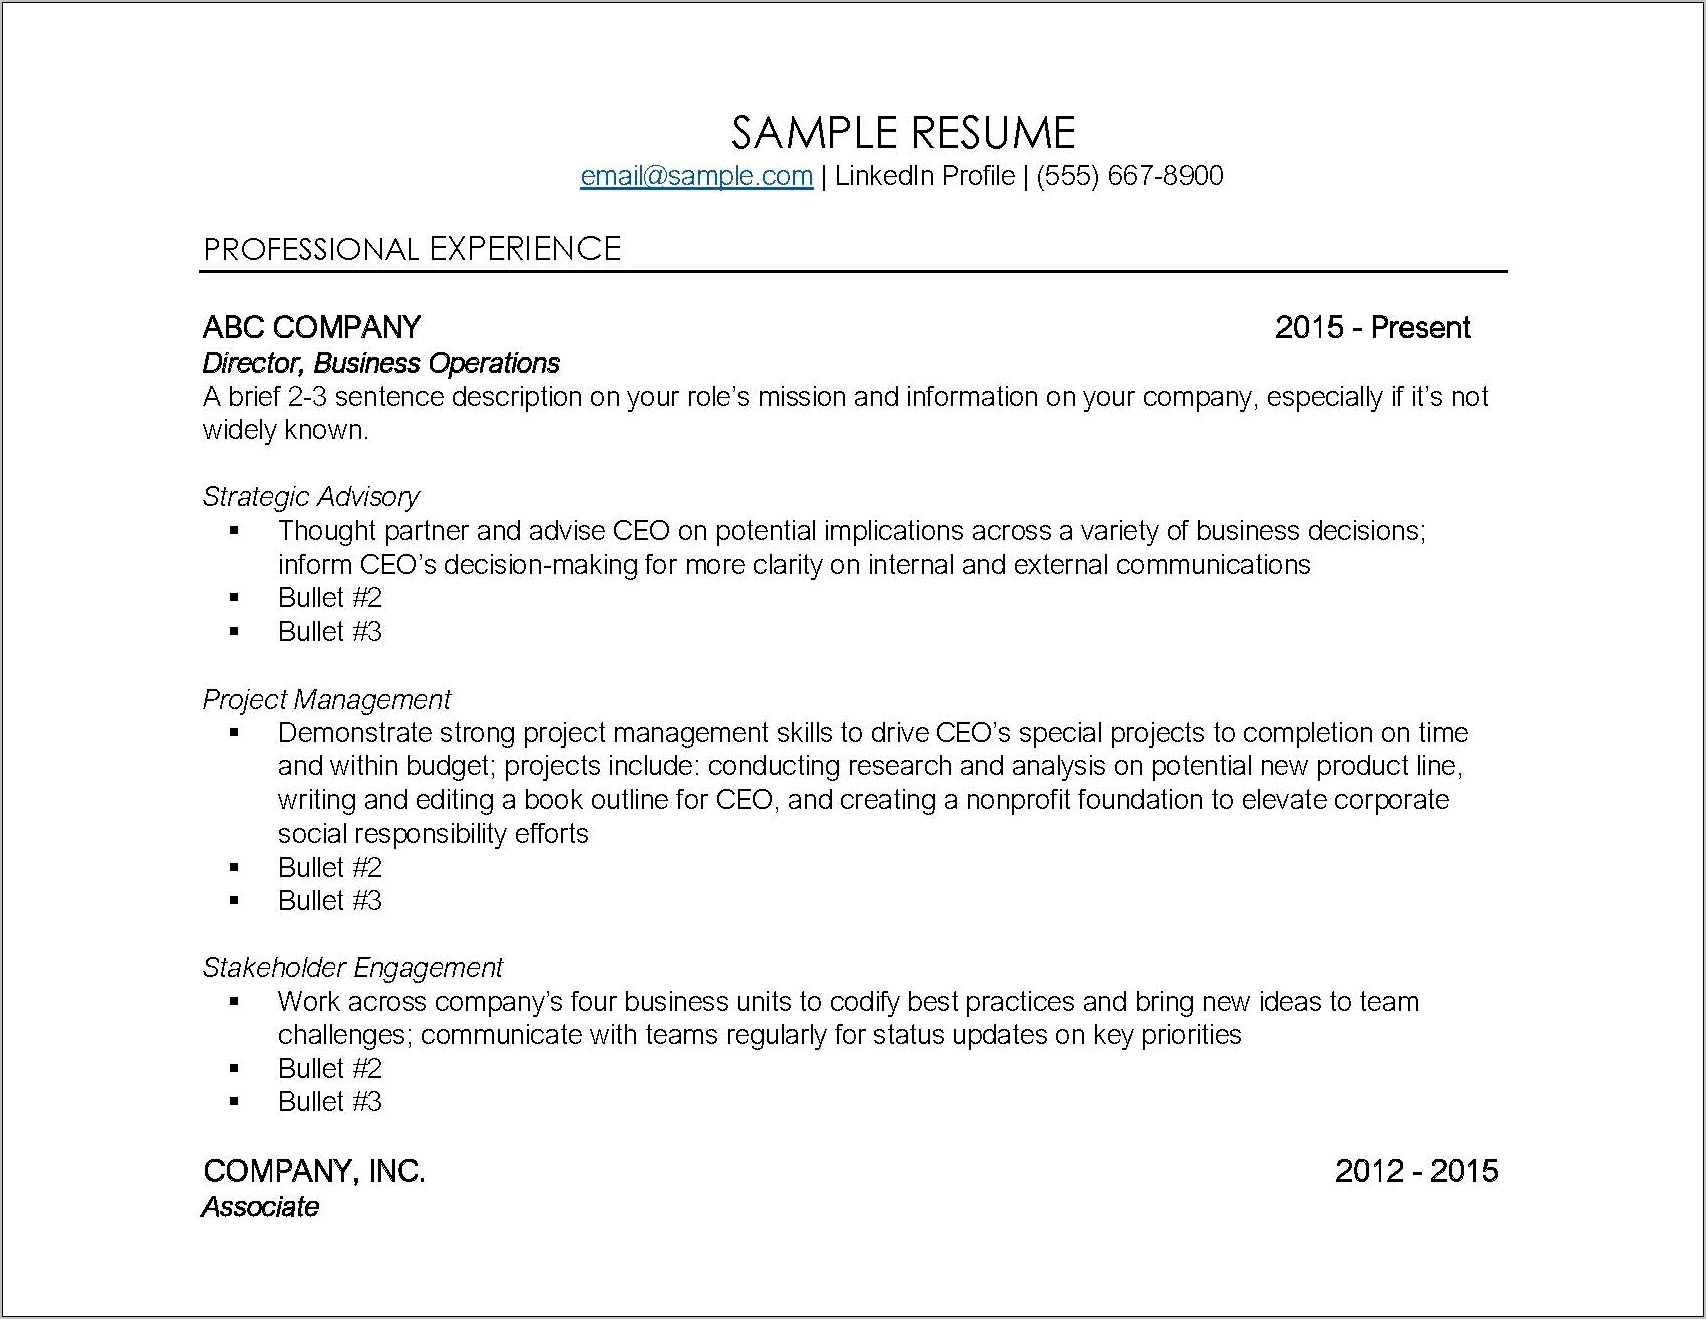 Resume Bulletin Point Examples For Start Up Company